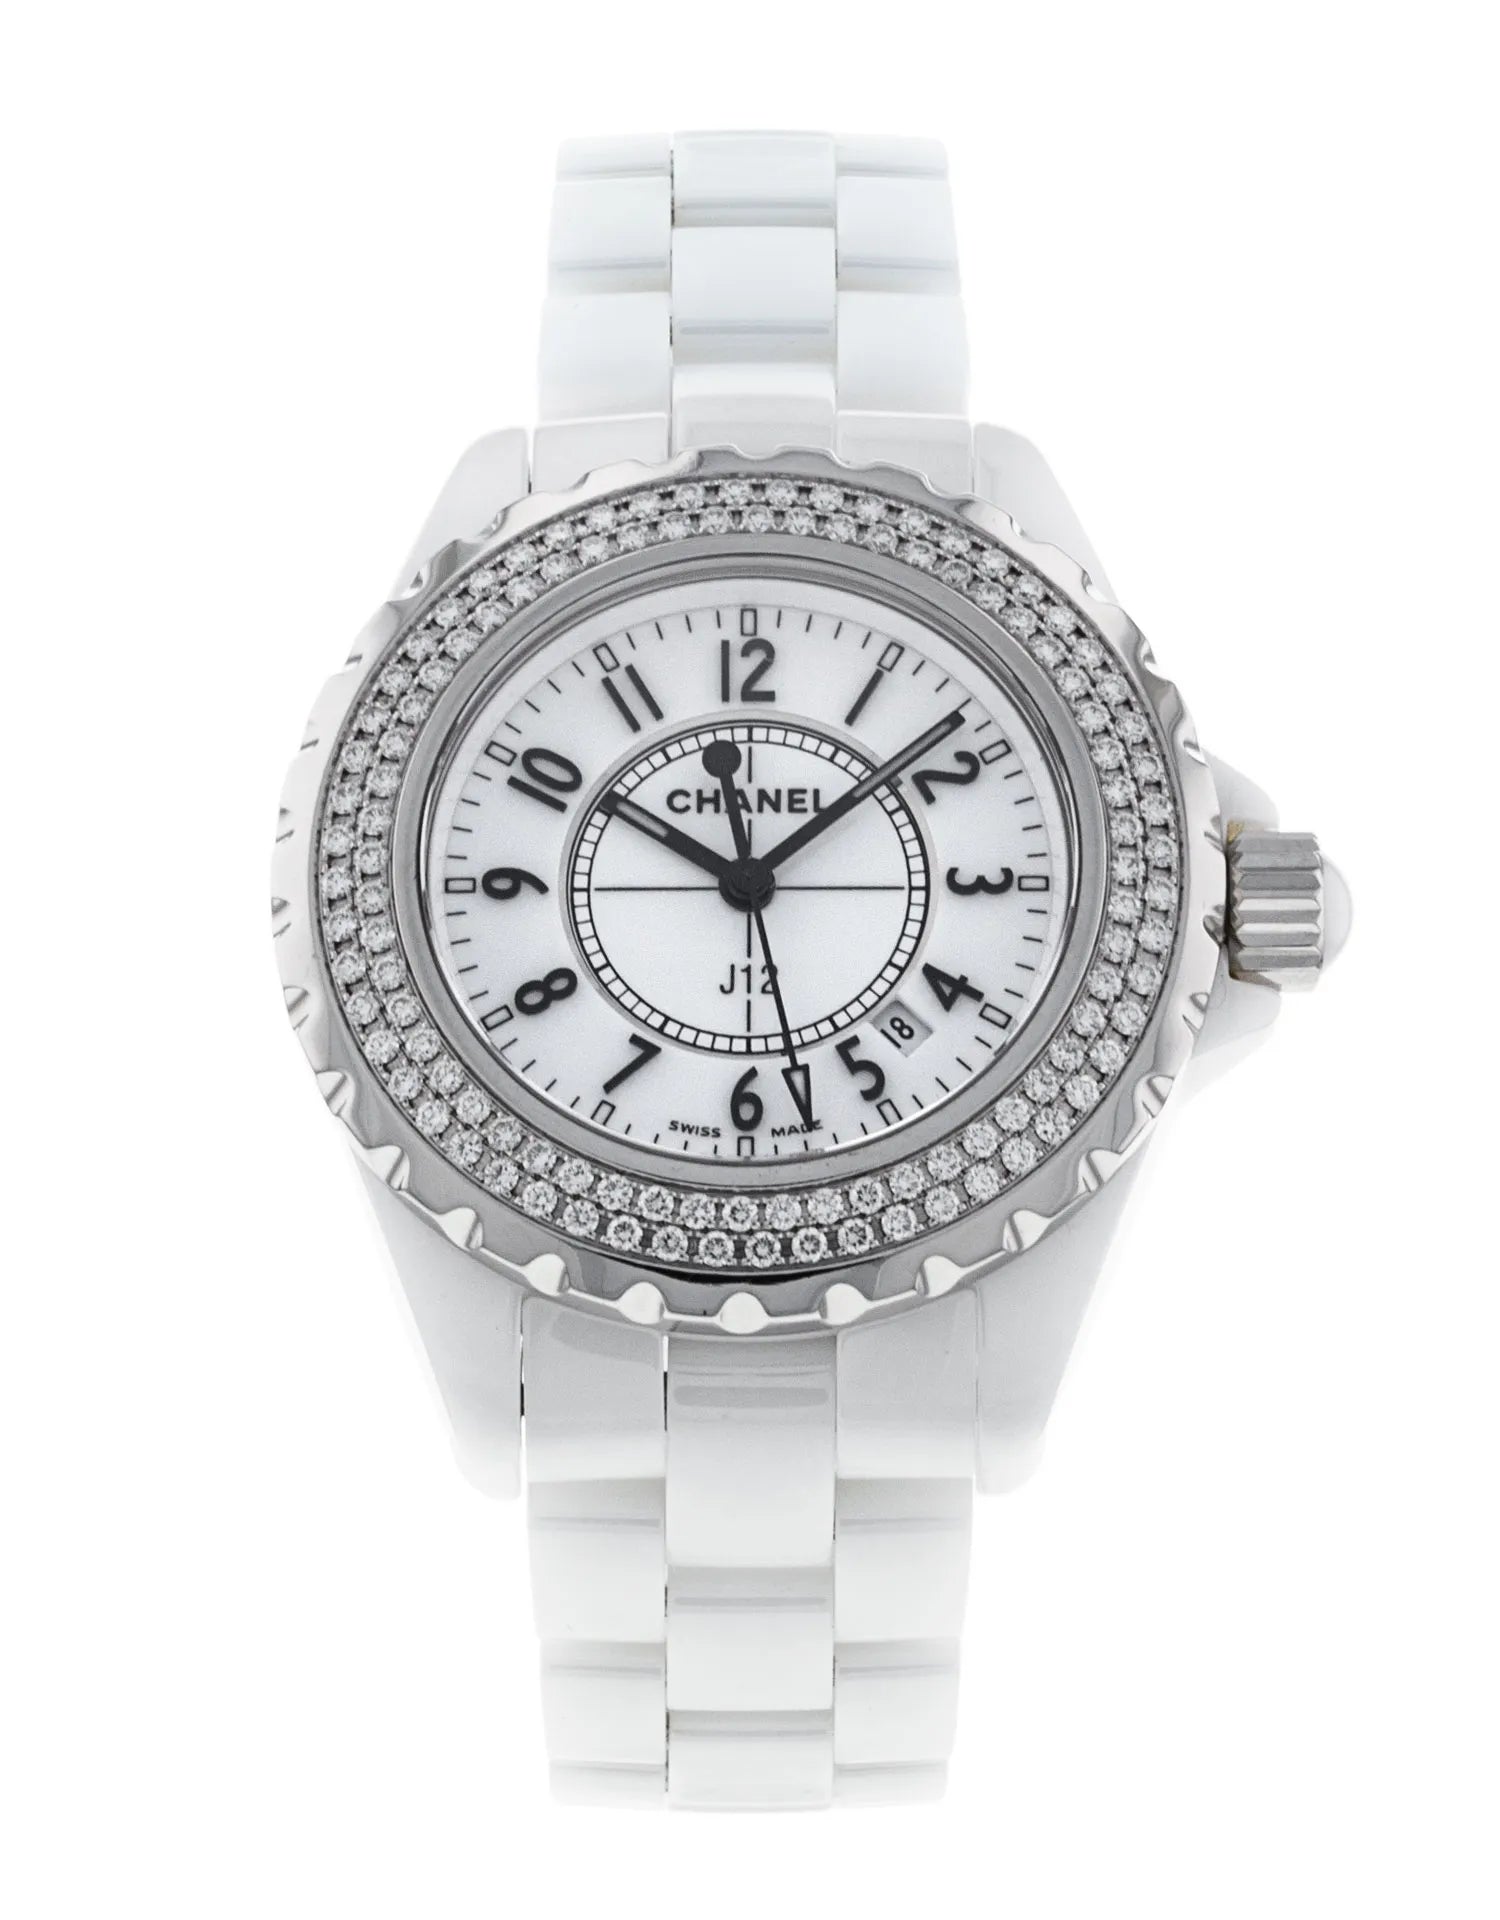  CHANEL J12 Automatic Crystal White Dial Ladies Watch